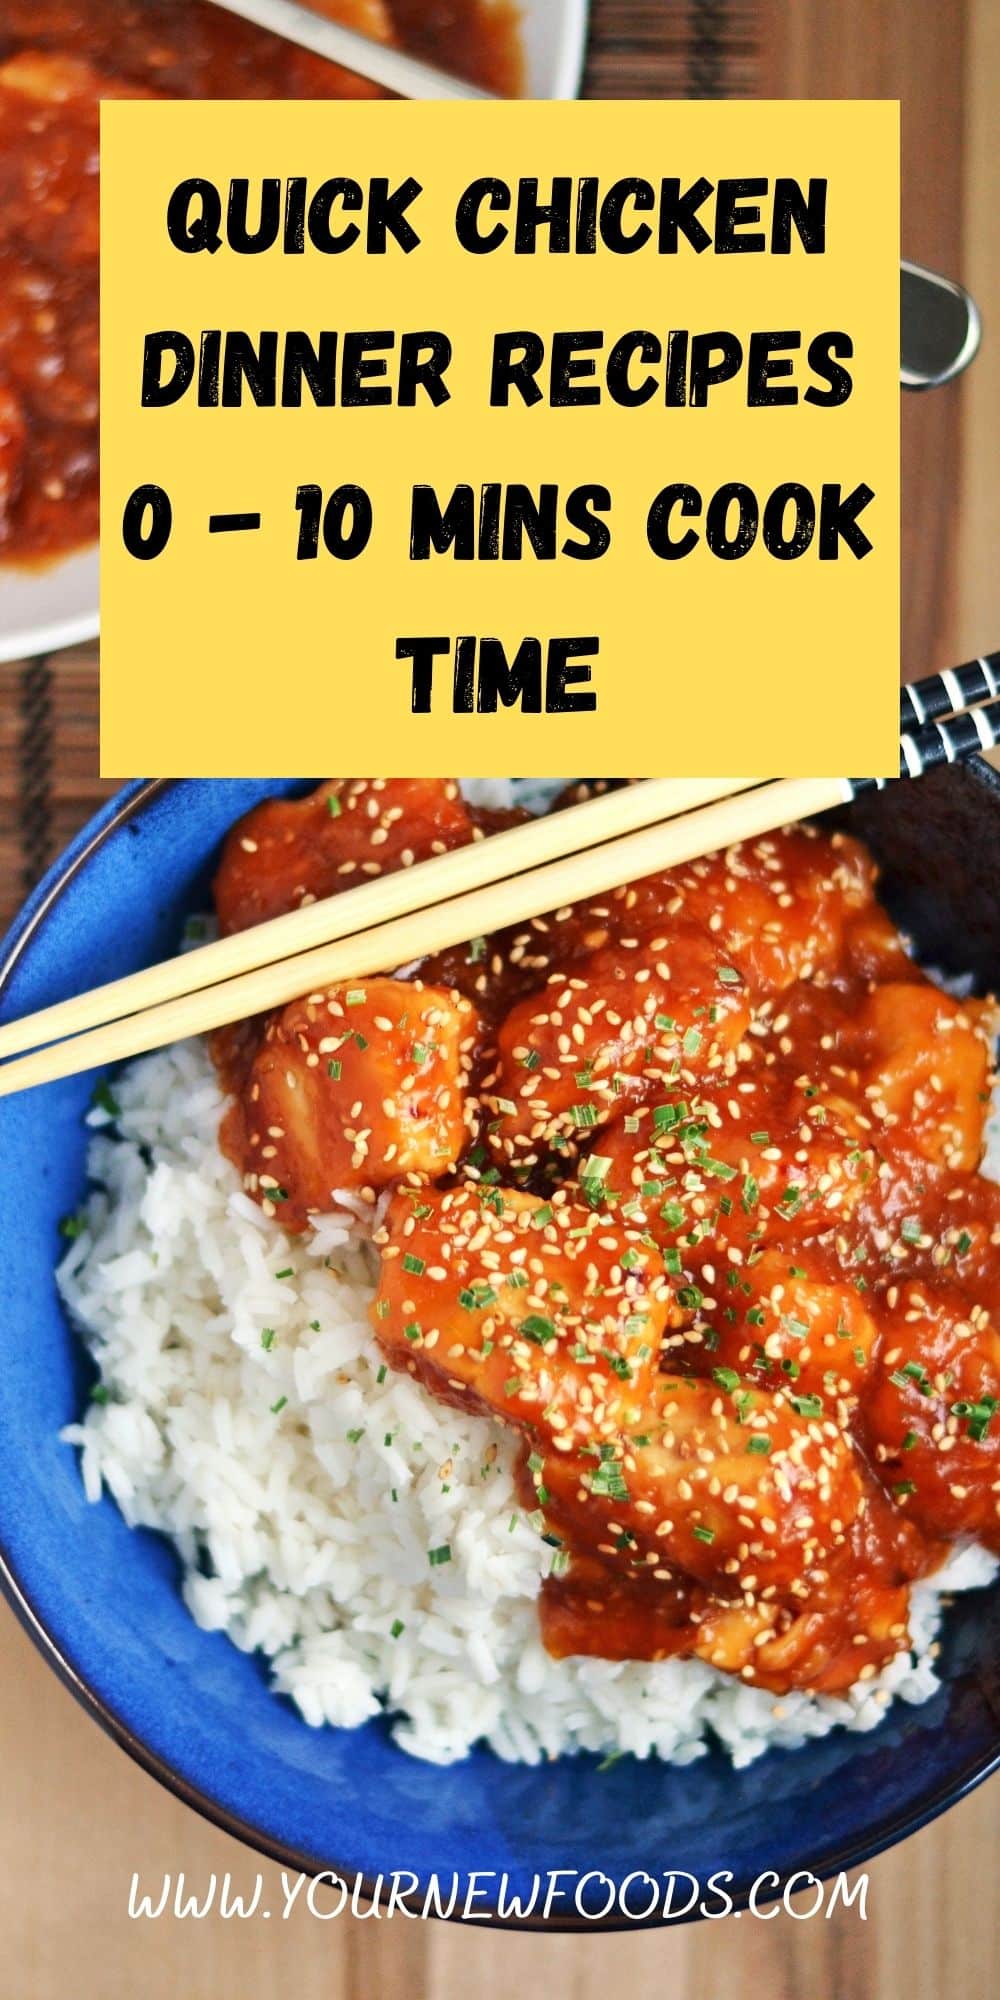 Quick Chicken Dinner Recipes 0 - 10 Mins Cook Time